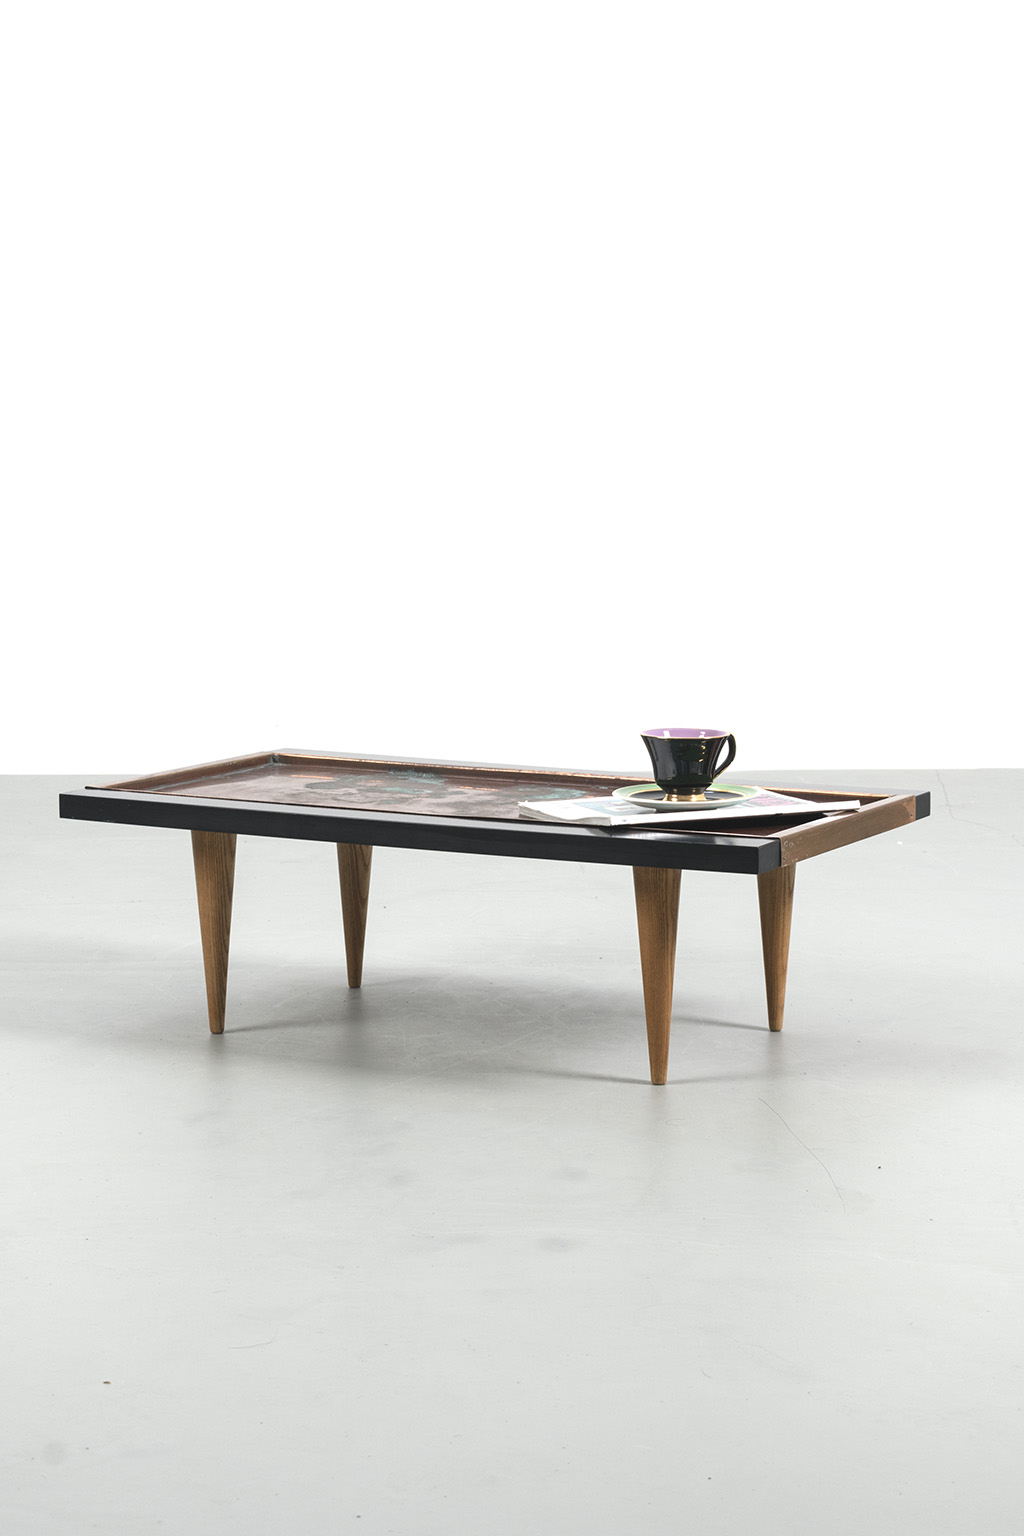 50s coffee table with copper tabletop